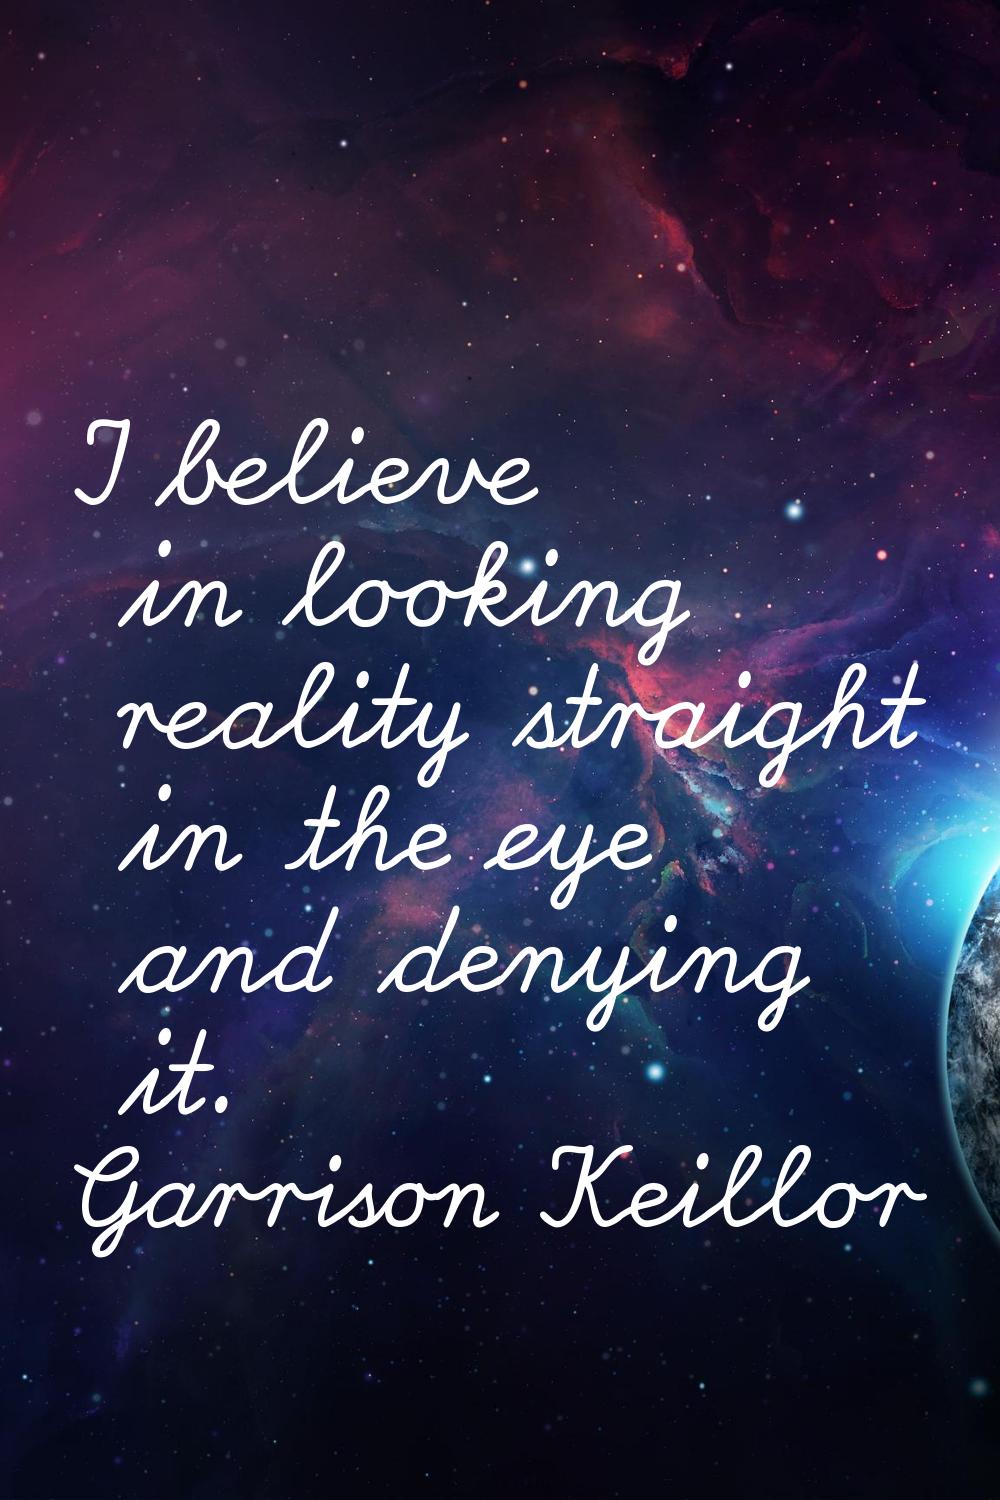 I believe in looking reality straight in the eye and denying it.